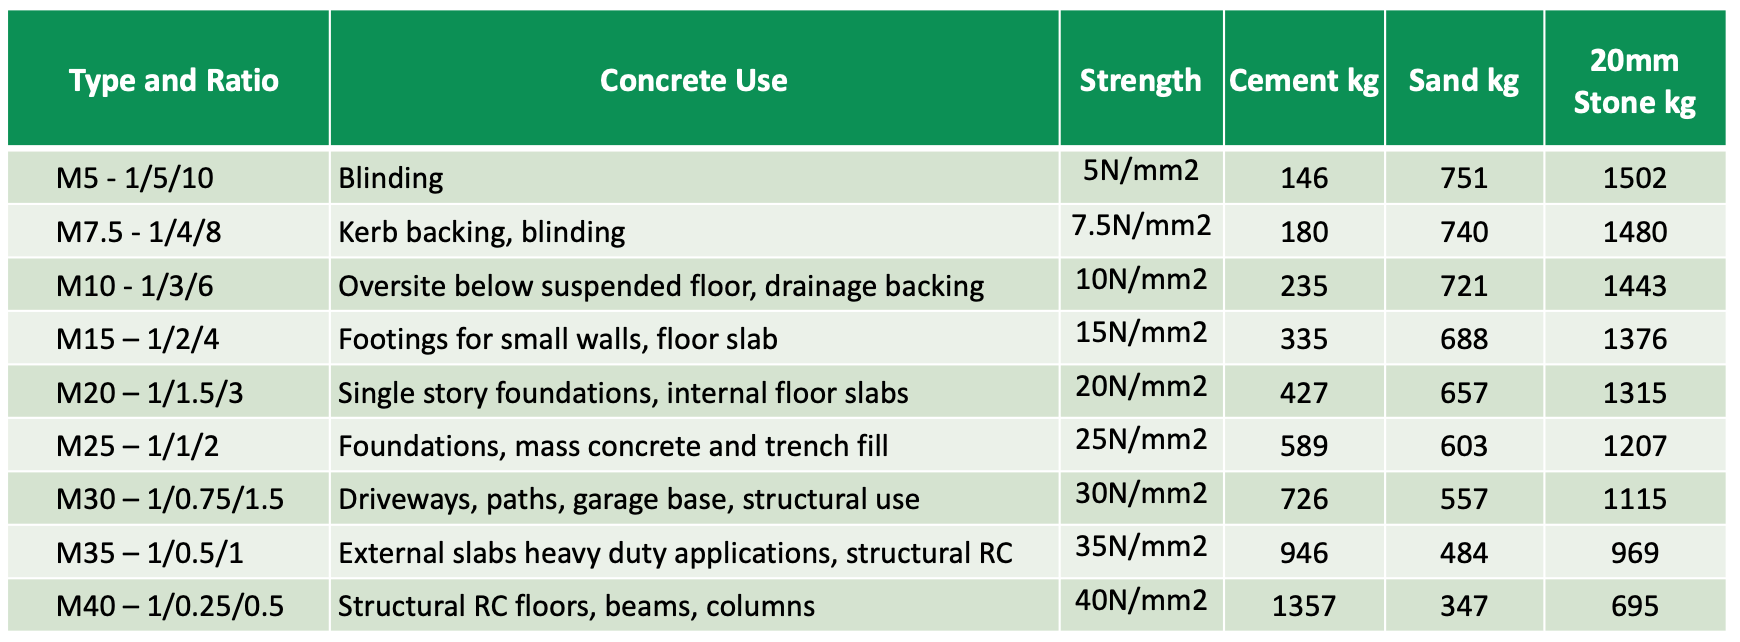 Pdf Effect Of Sand Fines And Water Cement Ratio On Concrete Properties